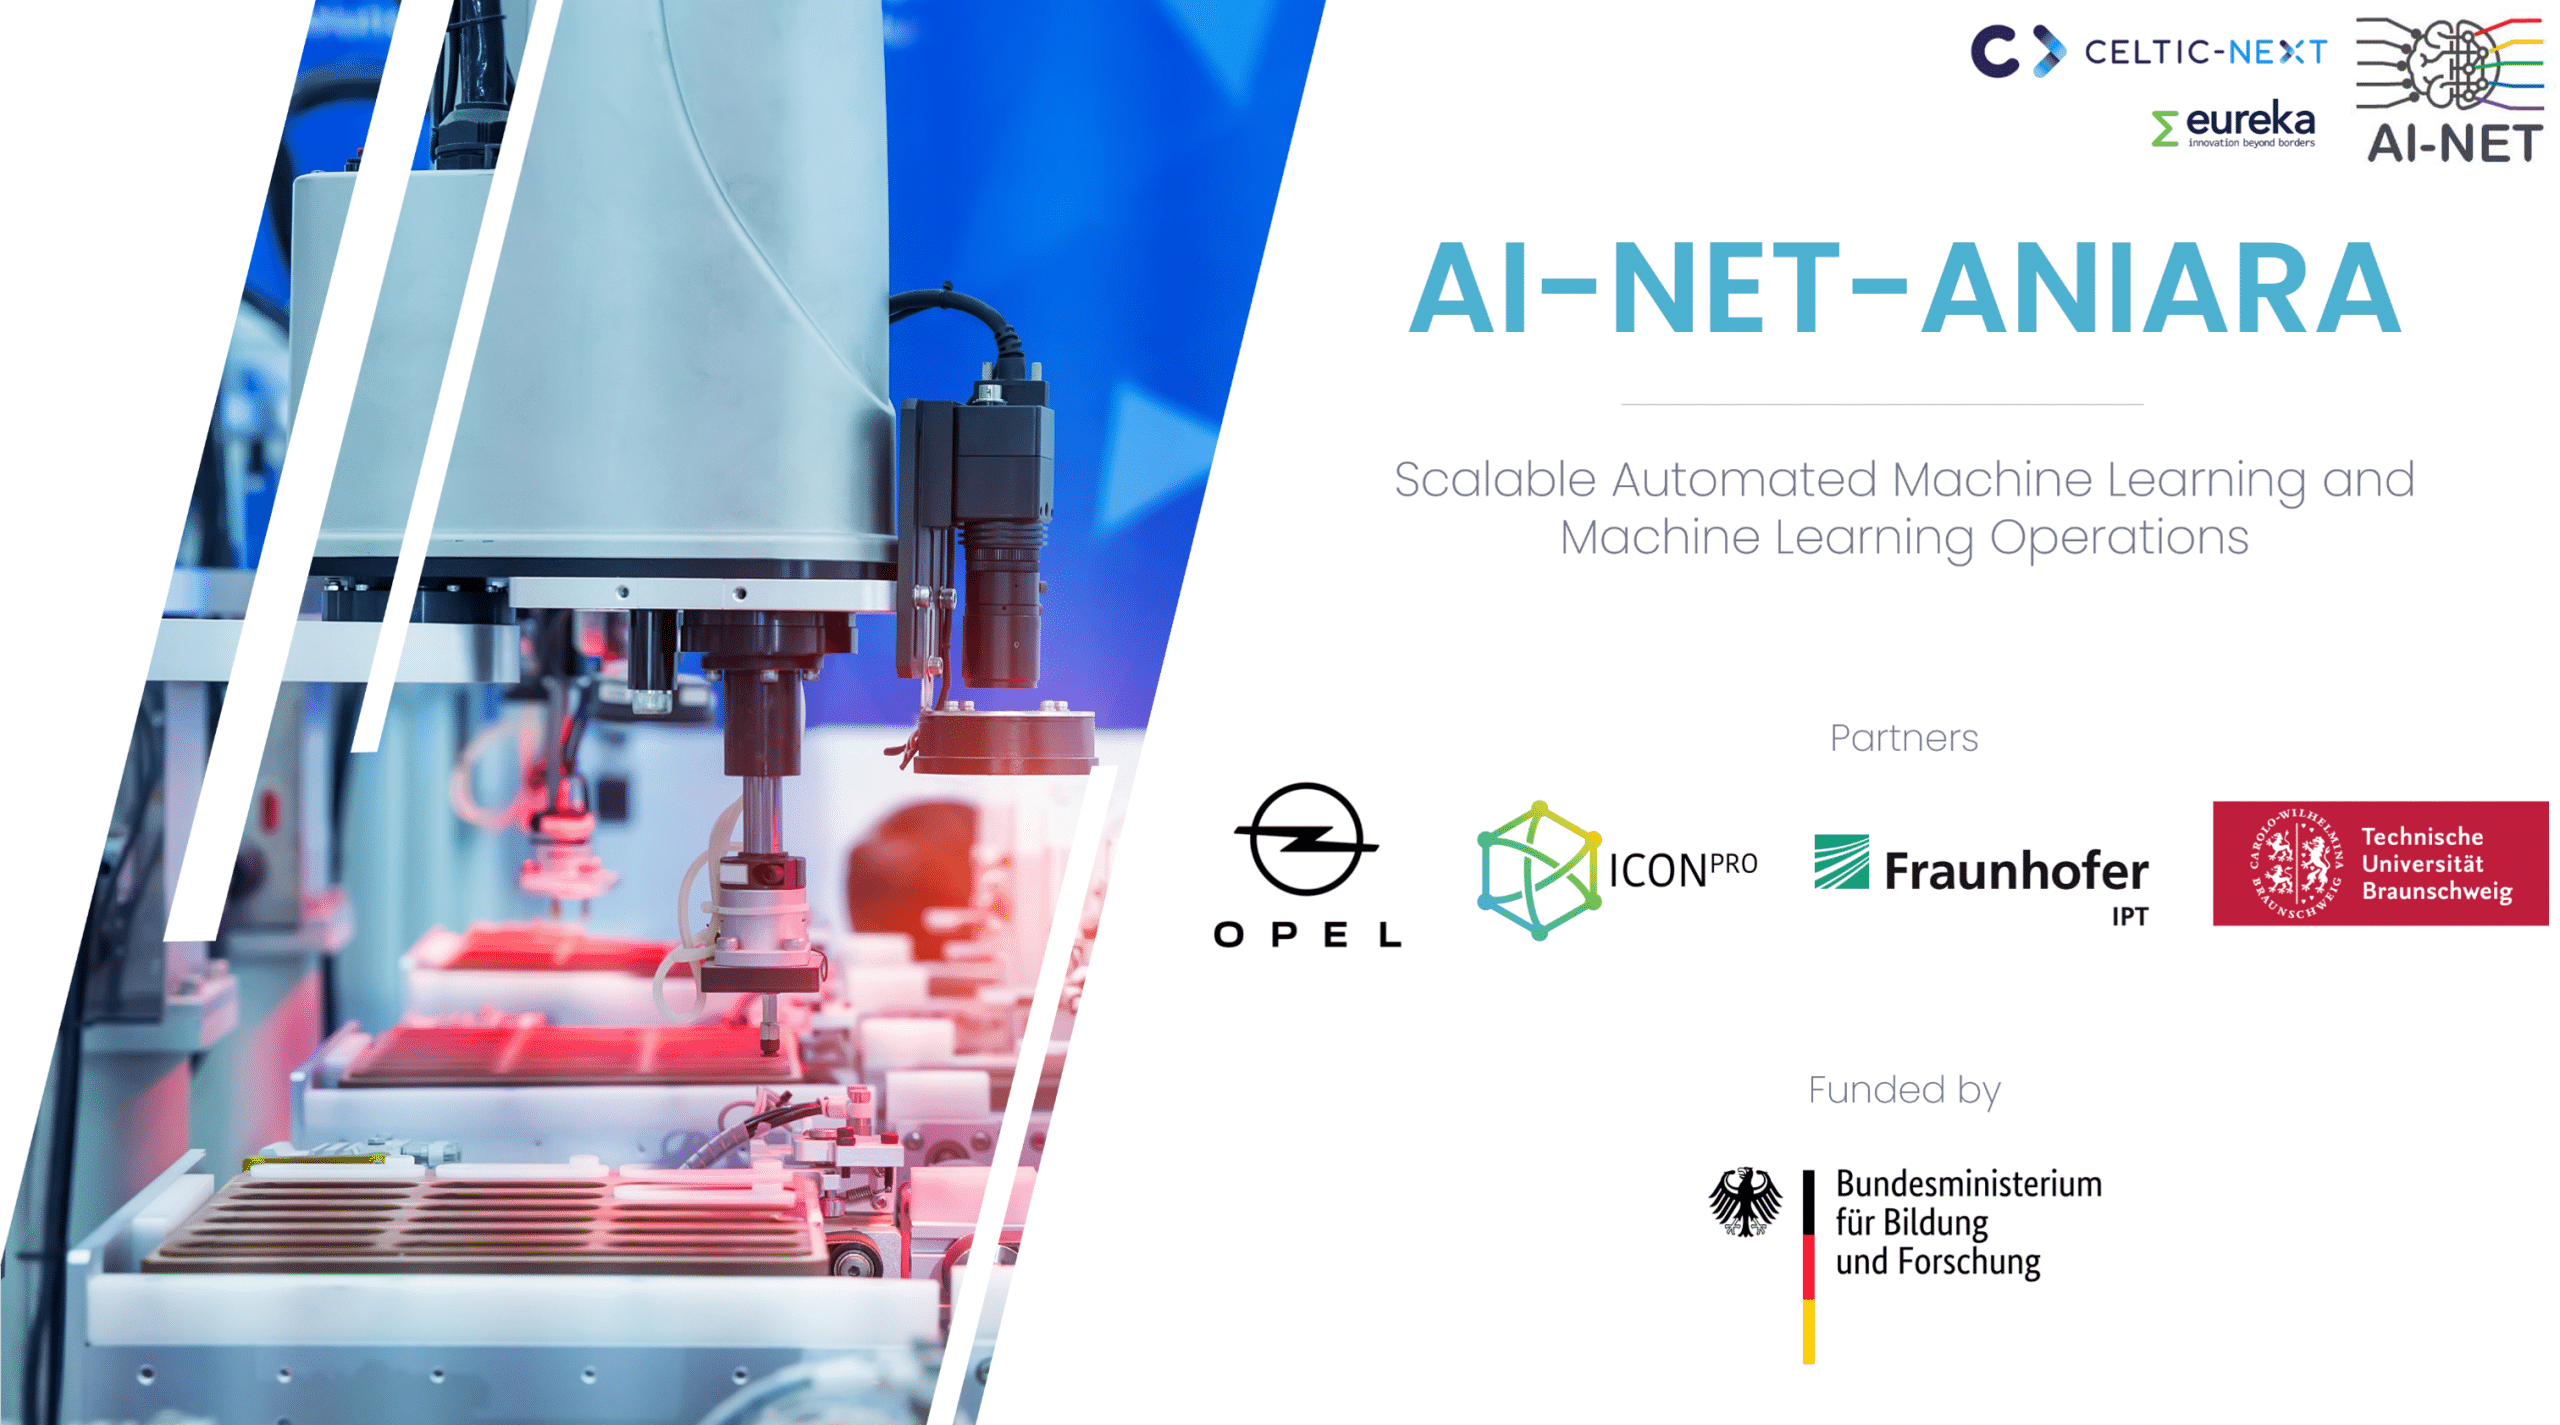 AI-NET-ANIARA Project – Scalable Automated Machine Learning and ML Operations.